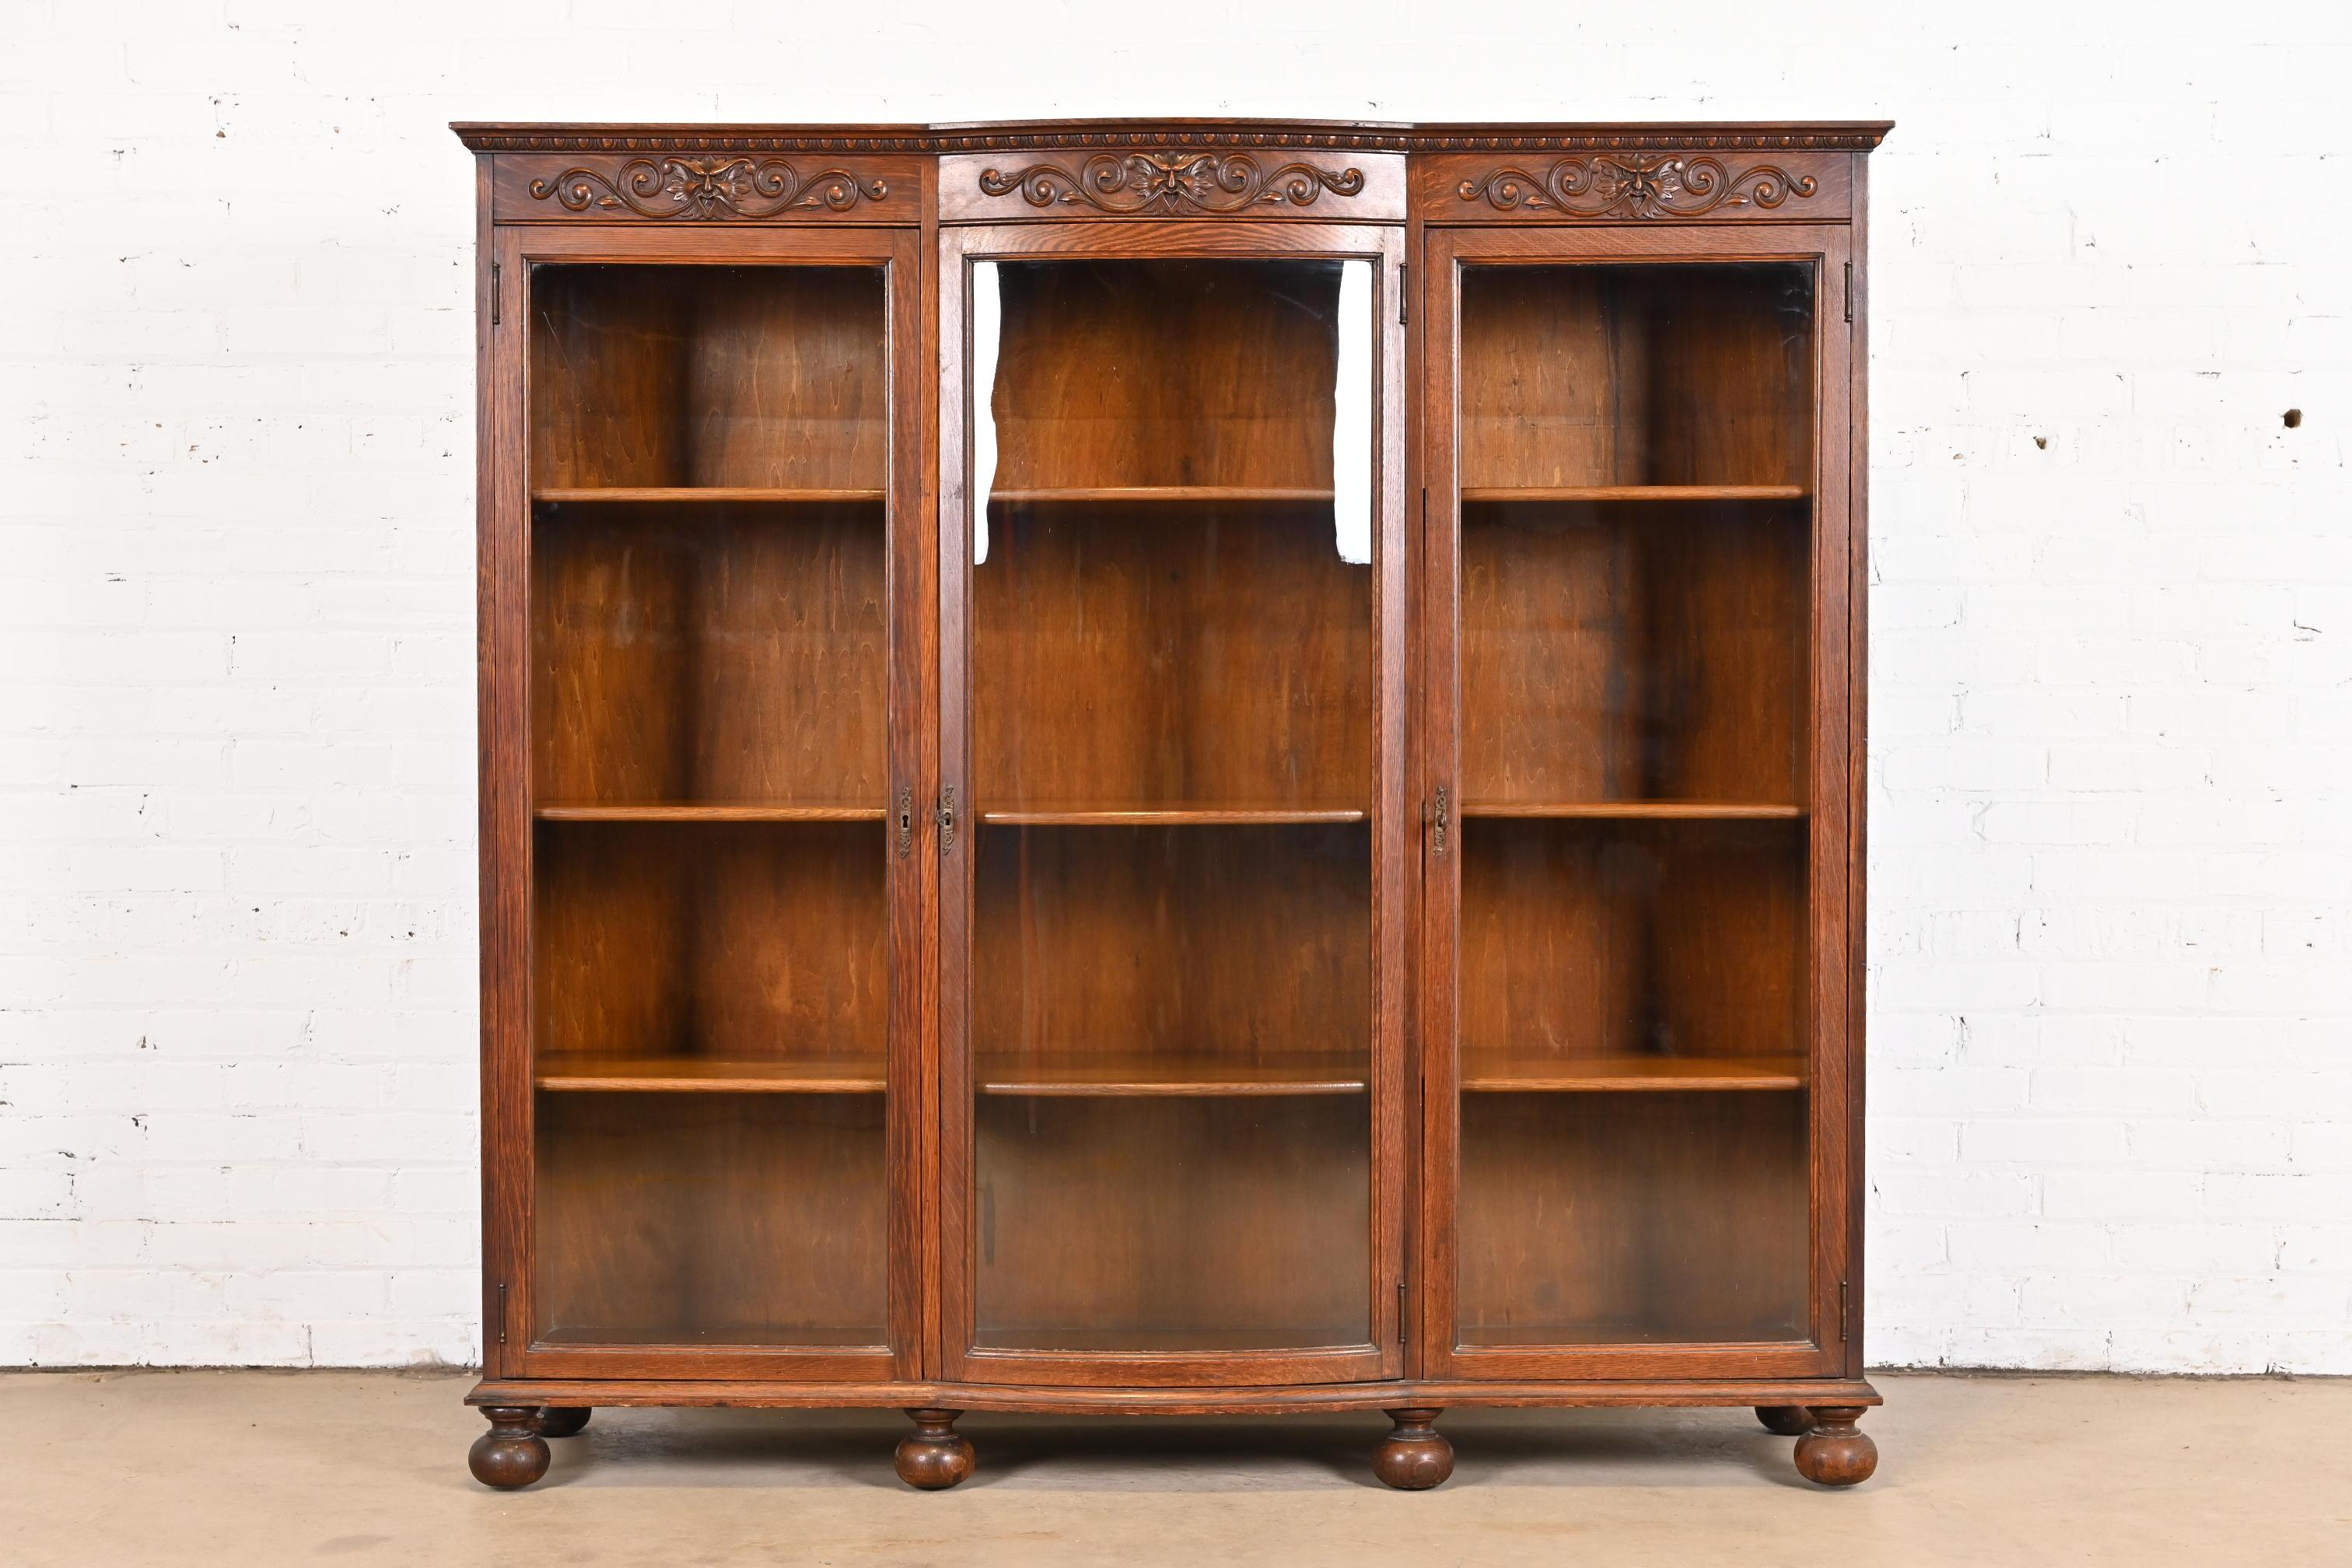 A gorgeous antique Victorian bow front triple bookcase

In the manner of R.J. Horner

USA, Circa 1900

Carved quarter sawn oak, with original glass doors and brass hardware. Cabinets lock, and key is included.

Measures: 63